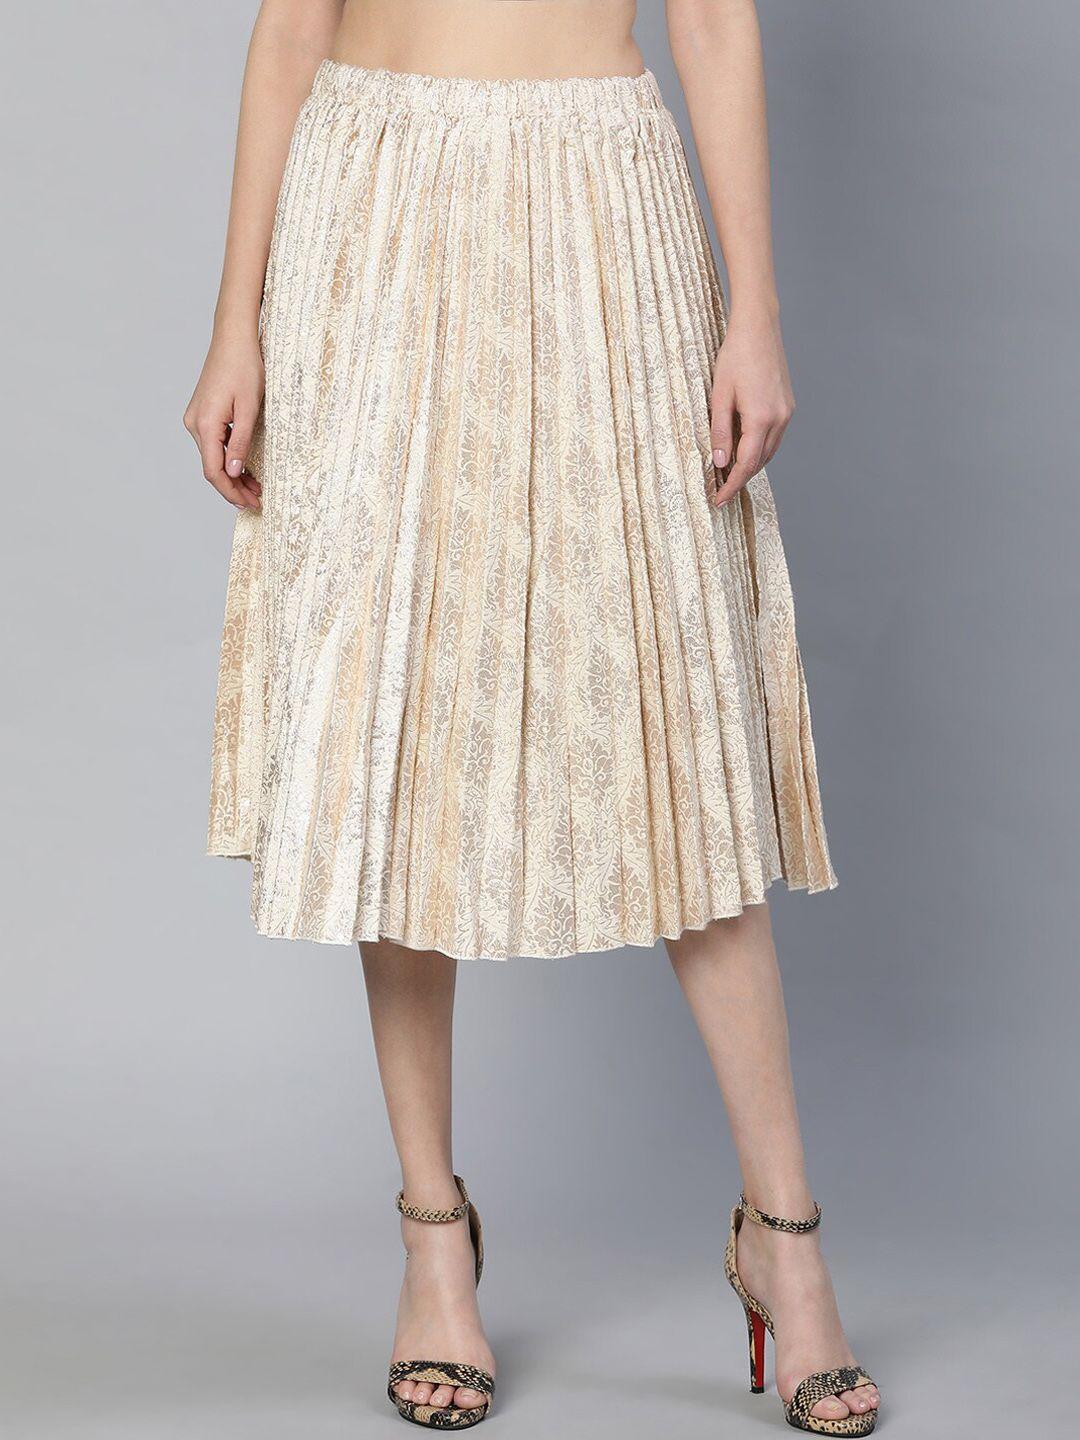 oxolloxo-printed-pleated-above-knee-length-flared-skirt